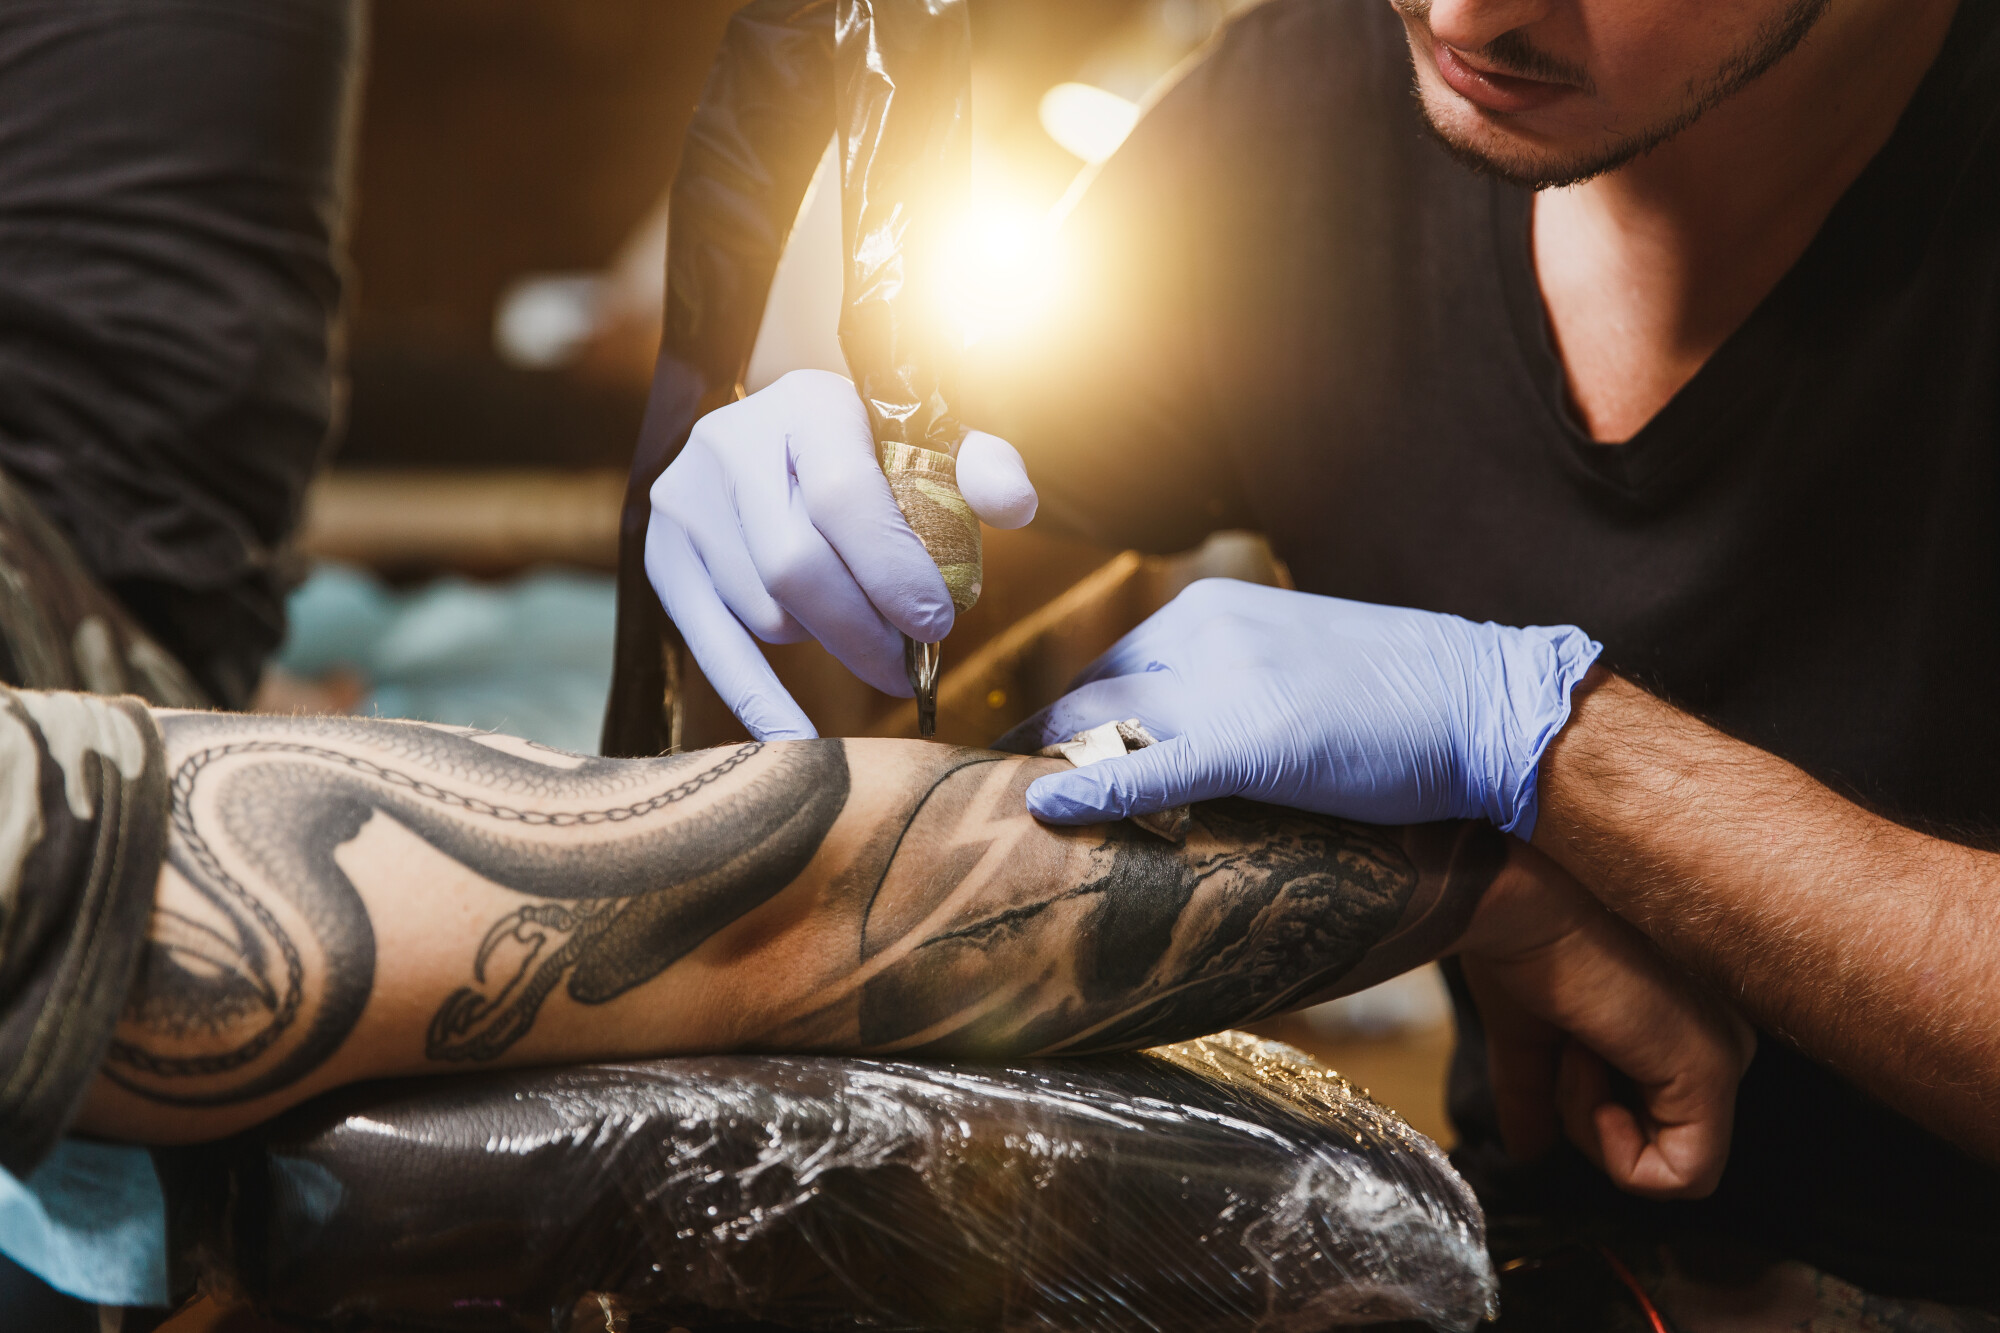 Tattoo artist's resume: how to write it successfully?